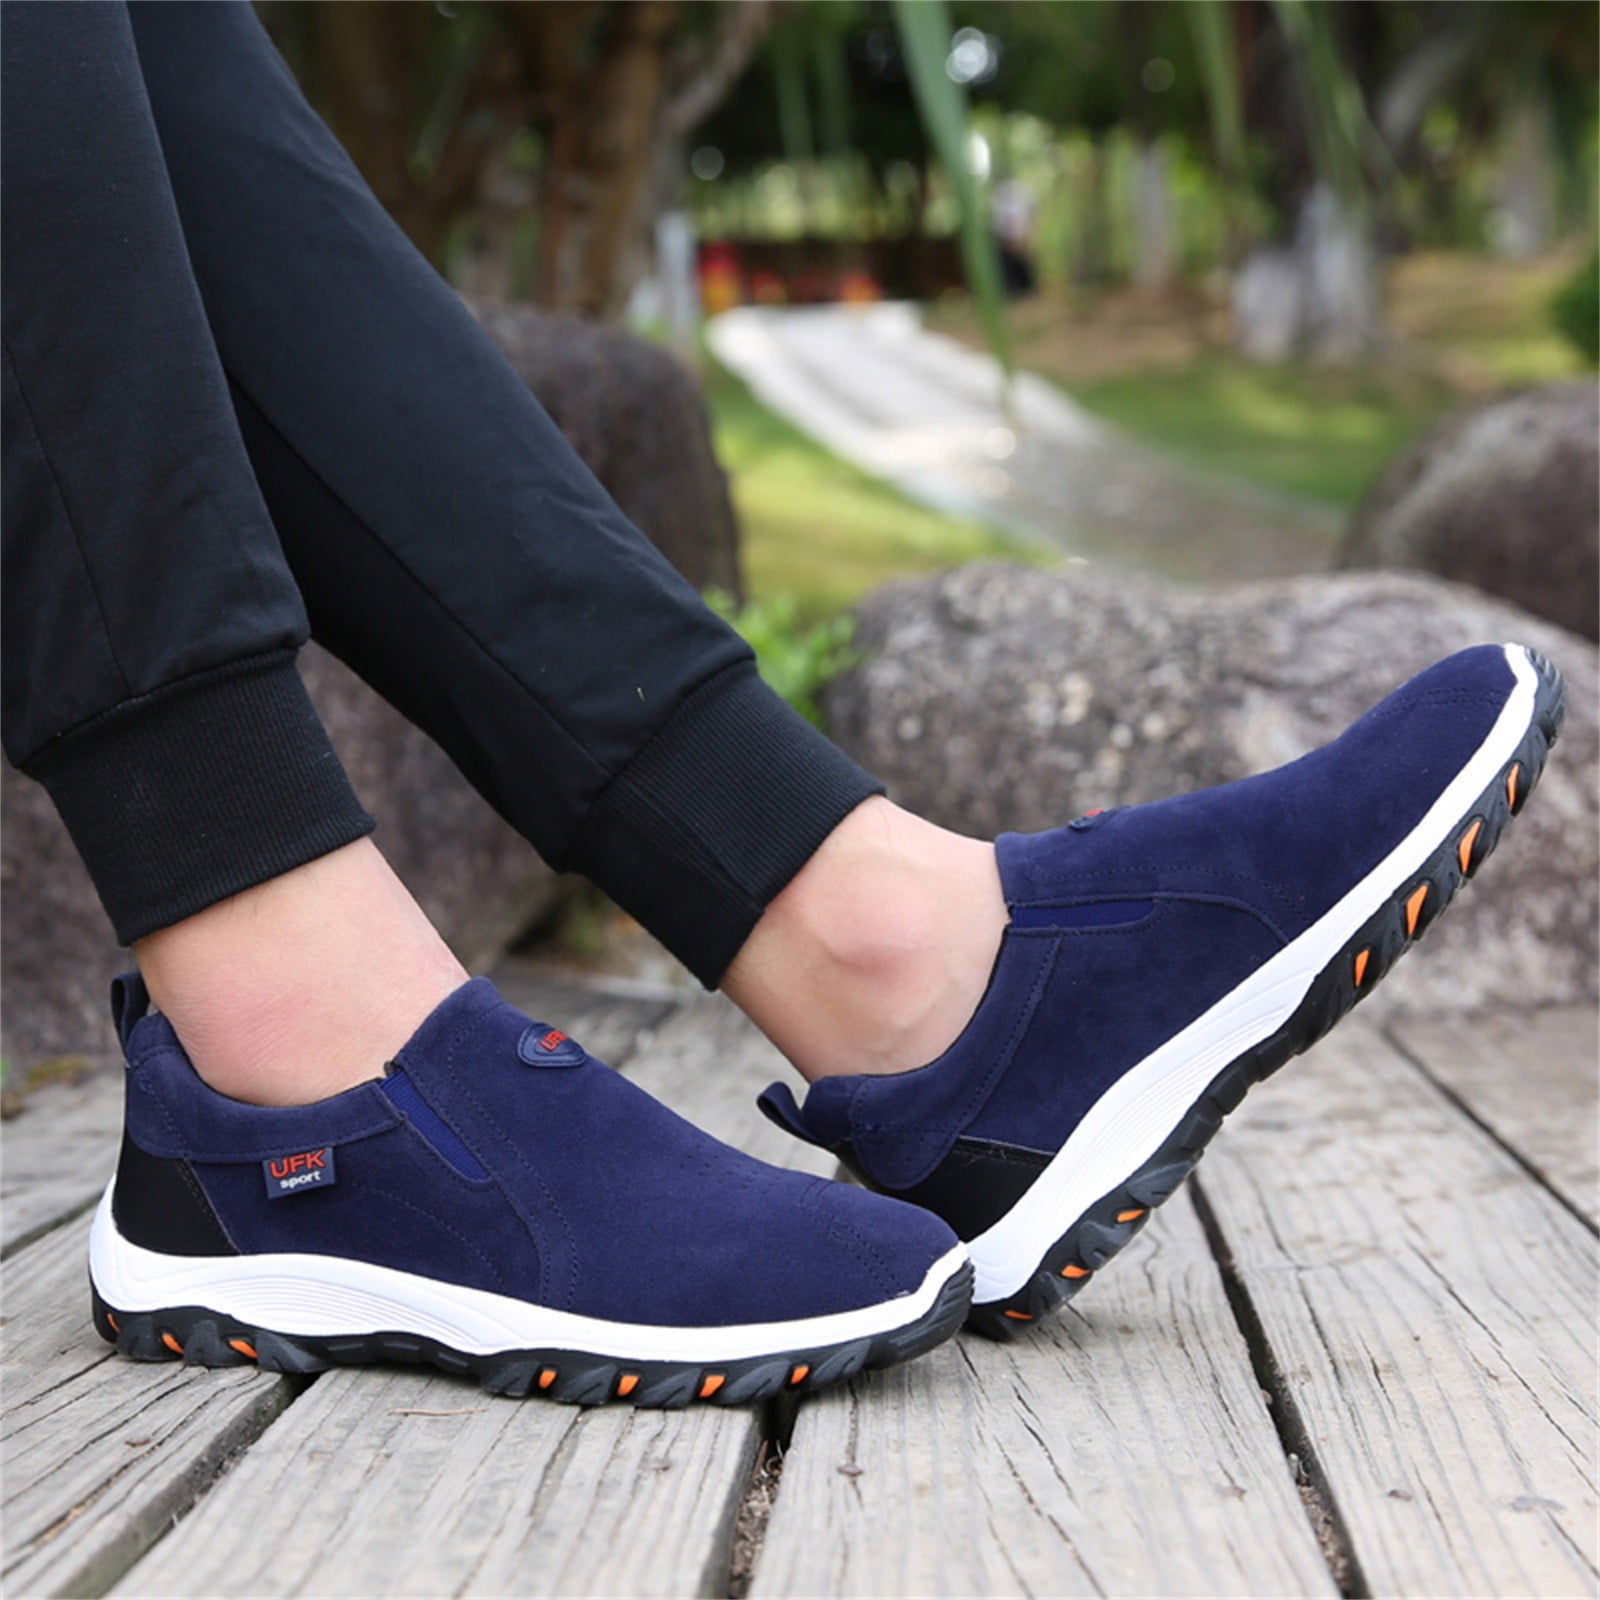 Yewnuw Mens Casual Shoes Walking Loafers Breathable Comfortable Lightweight  Travel Moccasin Shoes, Buy More, Save More